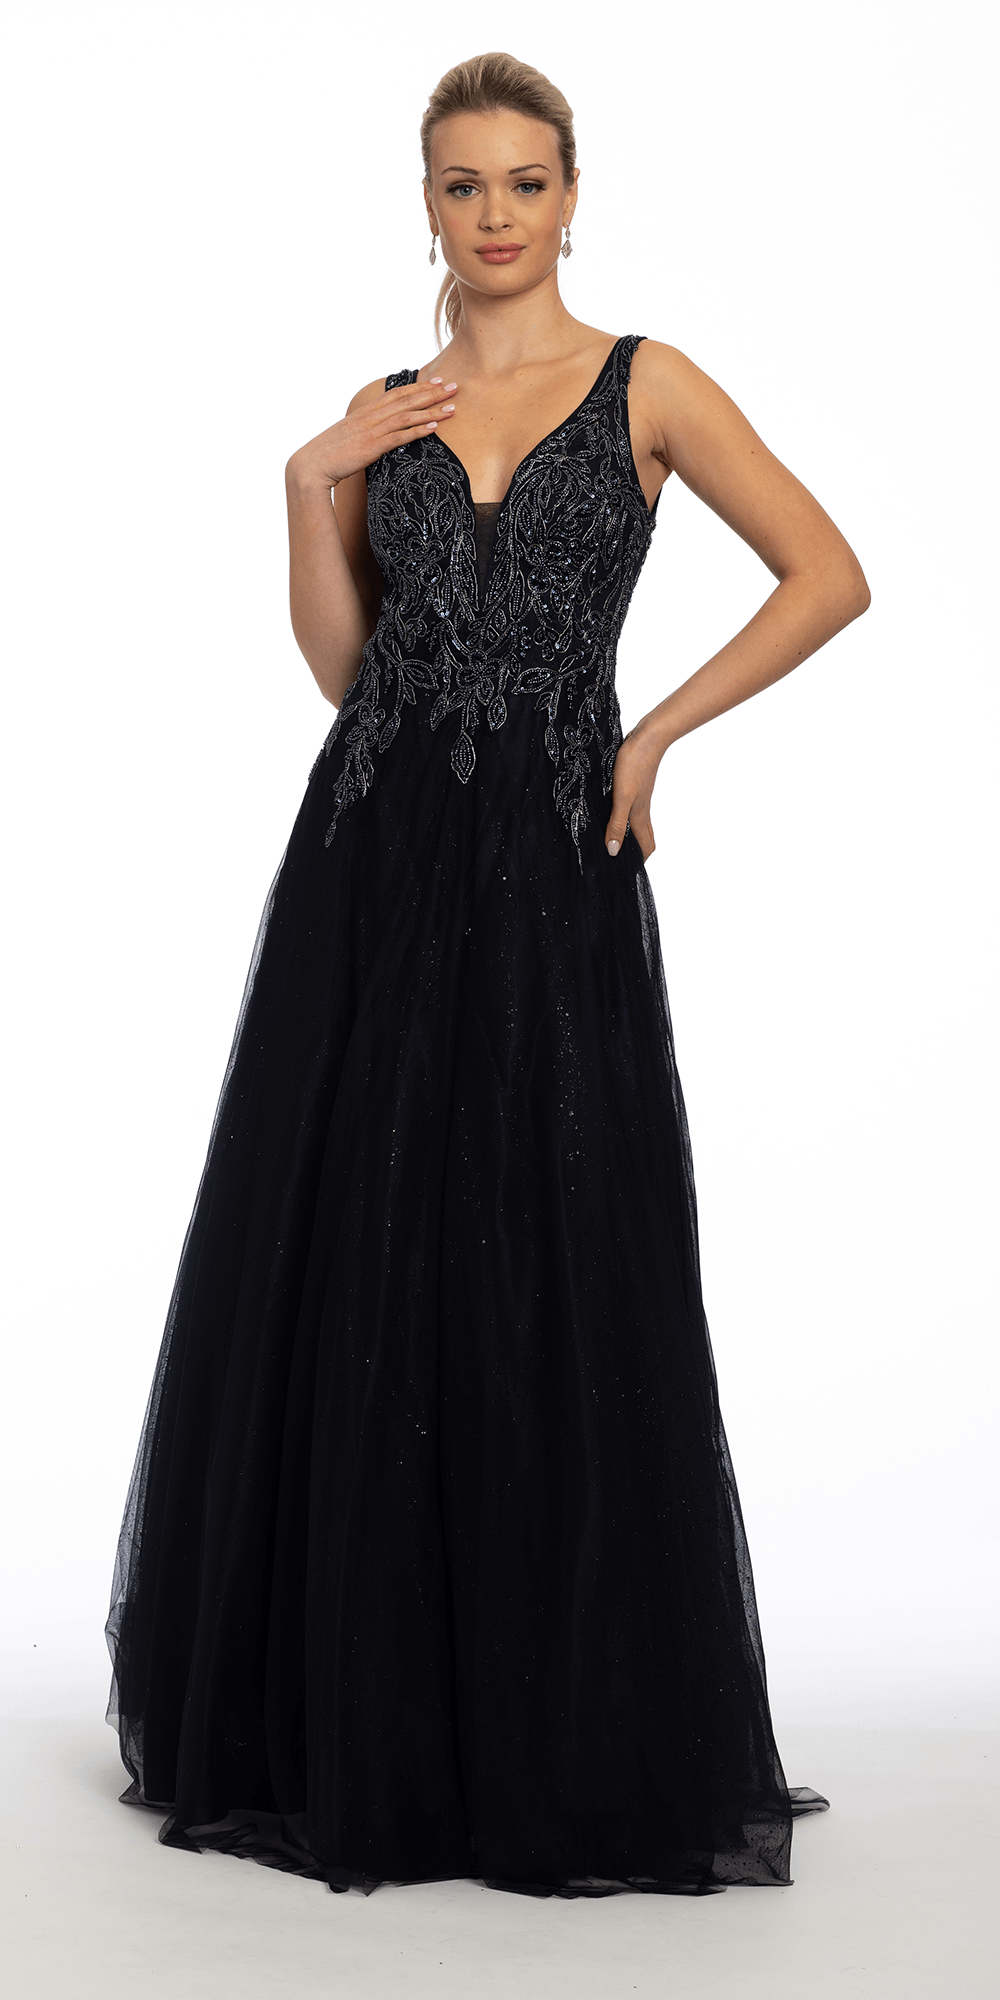 Camille La Vie Beaded Embroidered plunging Tulle Ballgown missy / 2 / navy